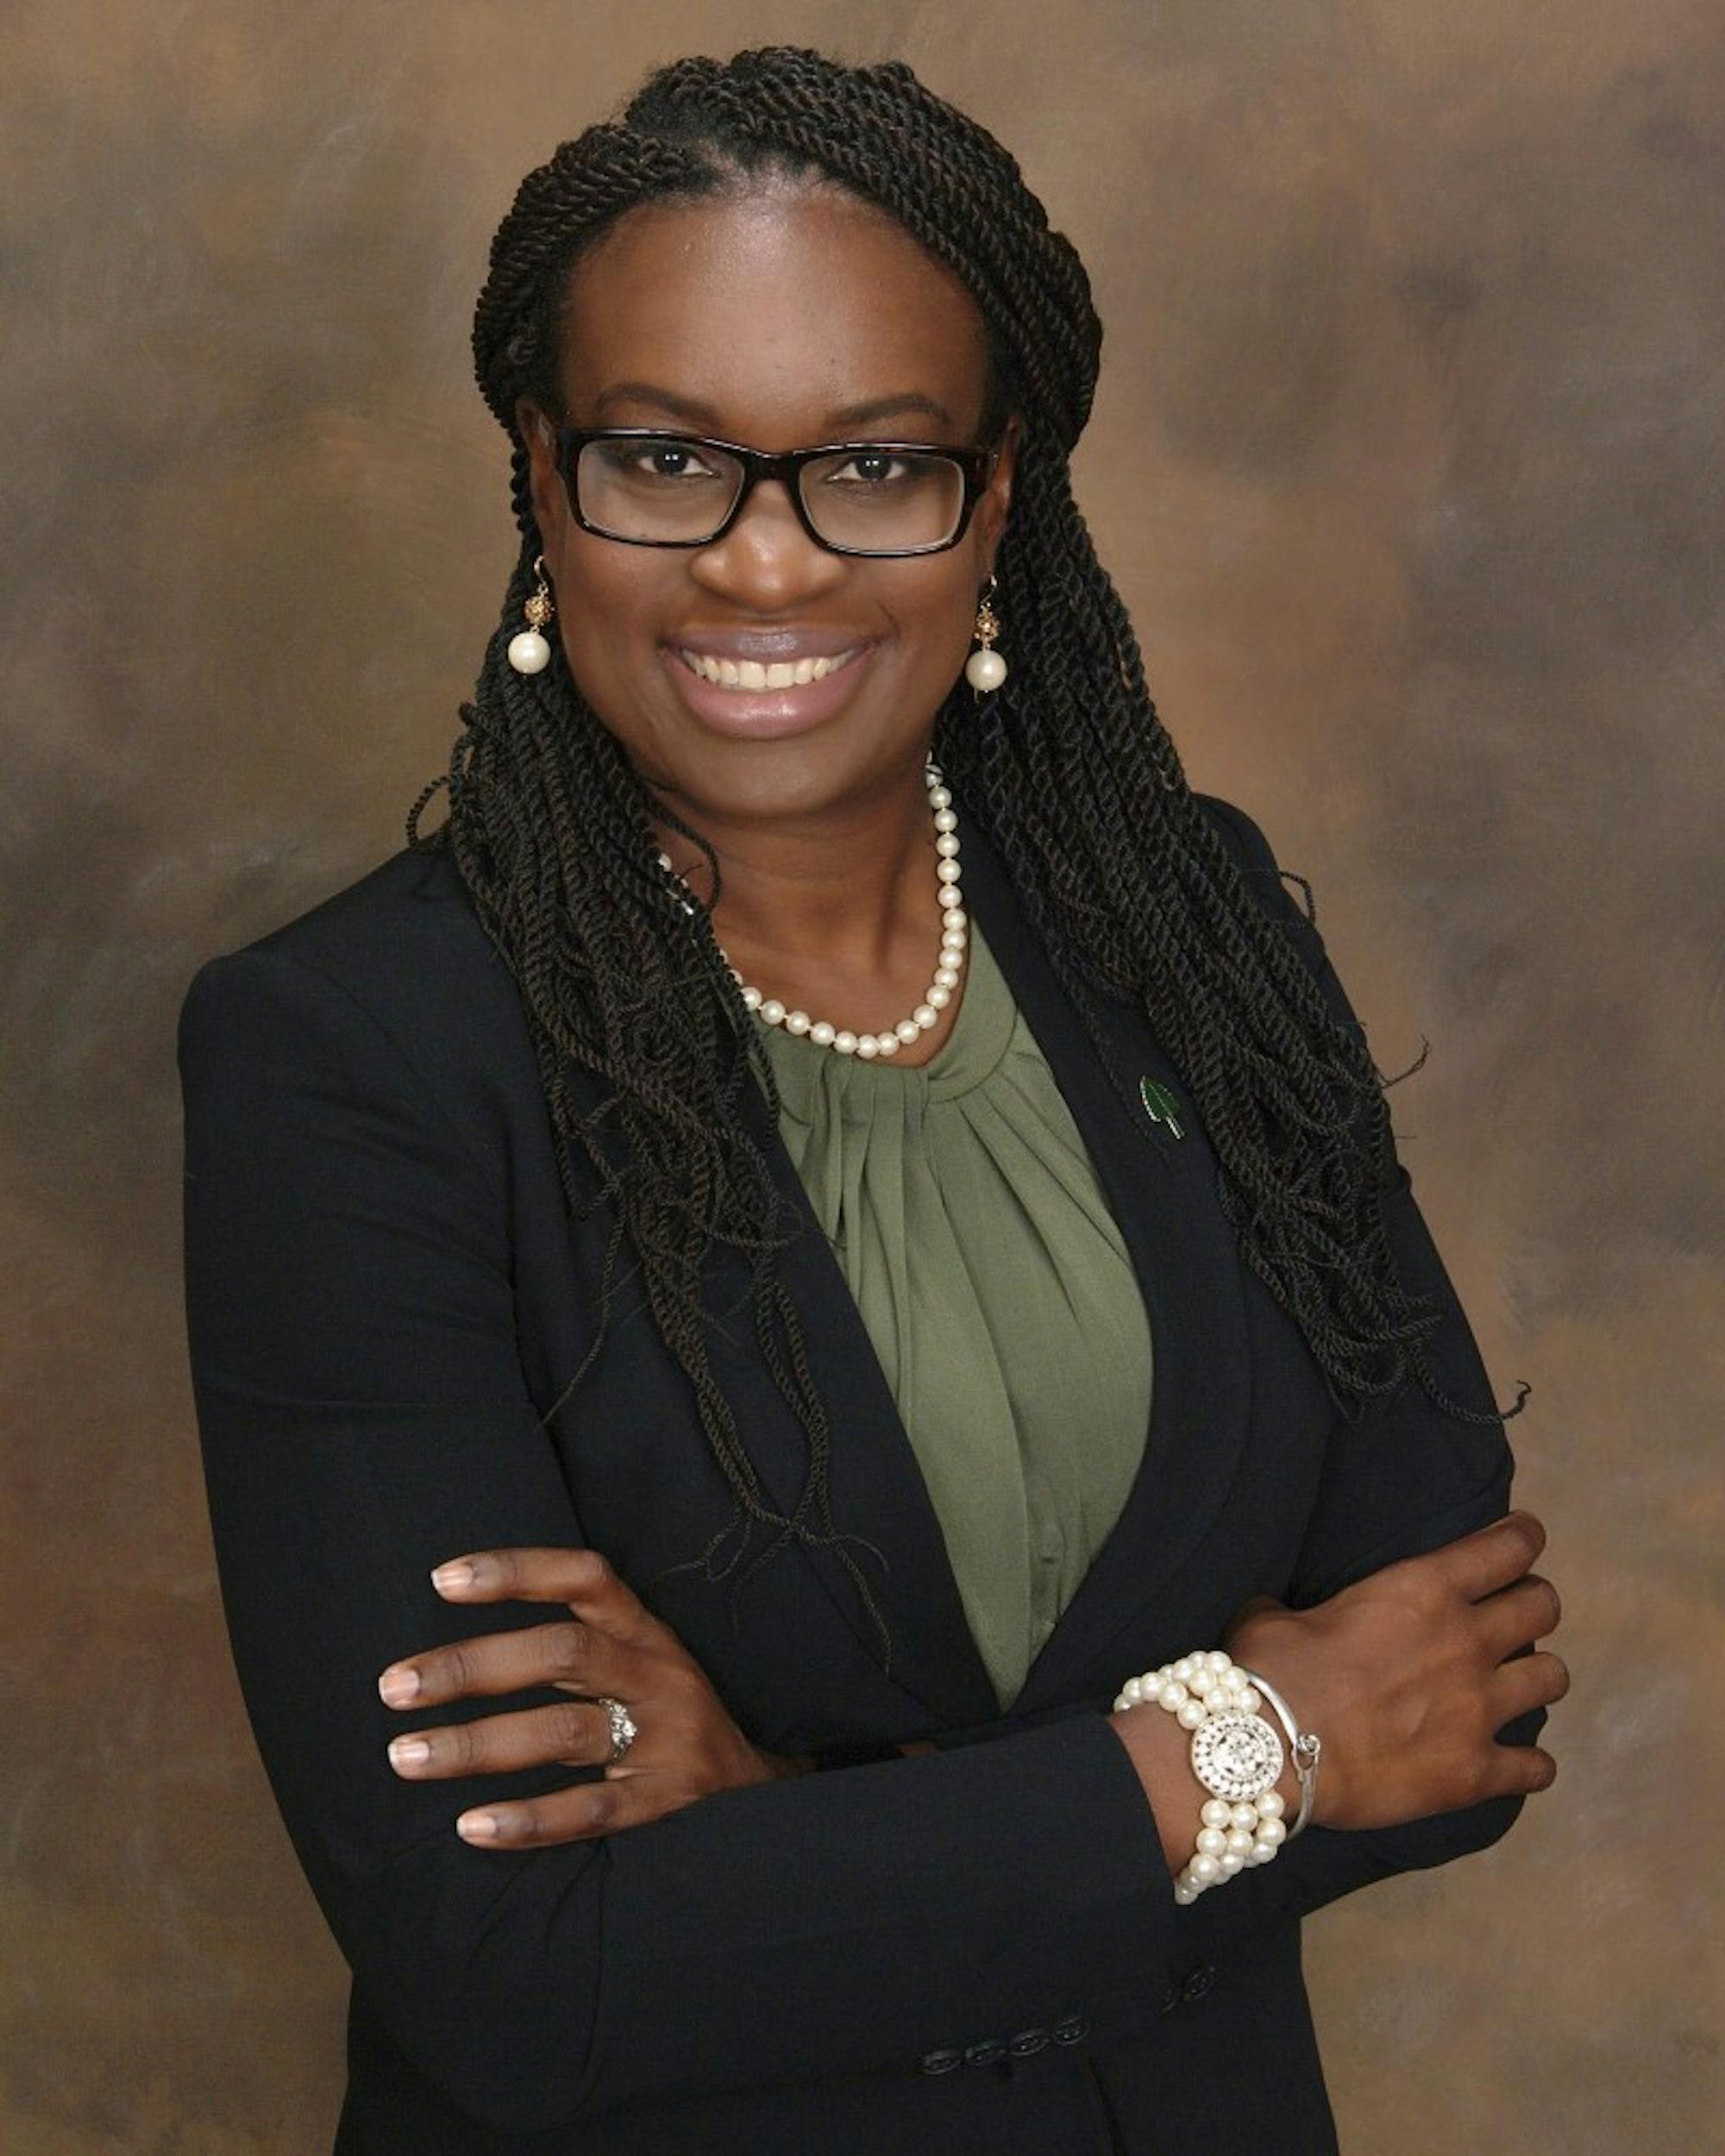 On June 25, Dartmouth made a historic decision with the hiring of a new senior associate athletics director Dr. Kristene Kelly, the first African American to hold a senior administrative position in the Dartmouth athletics department.